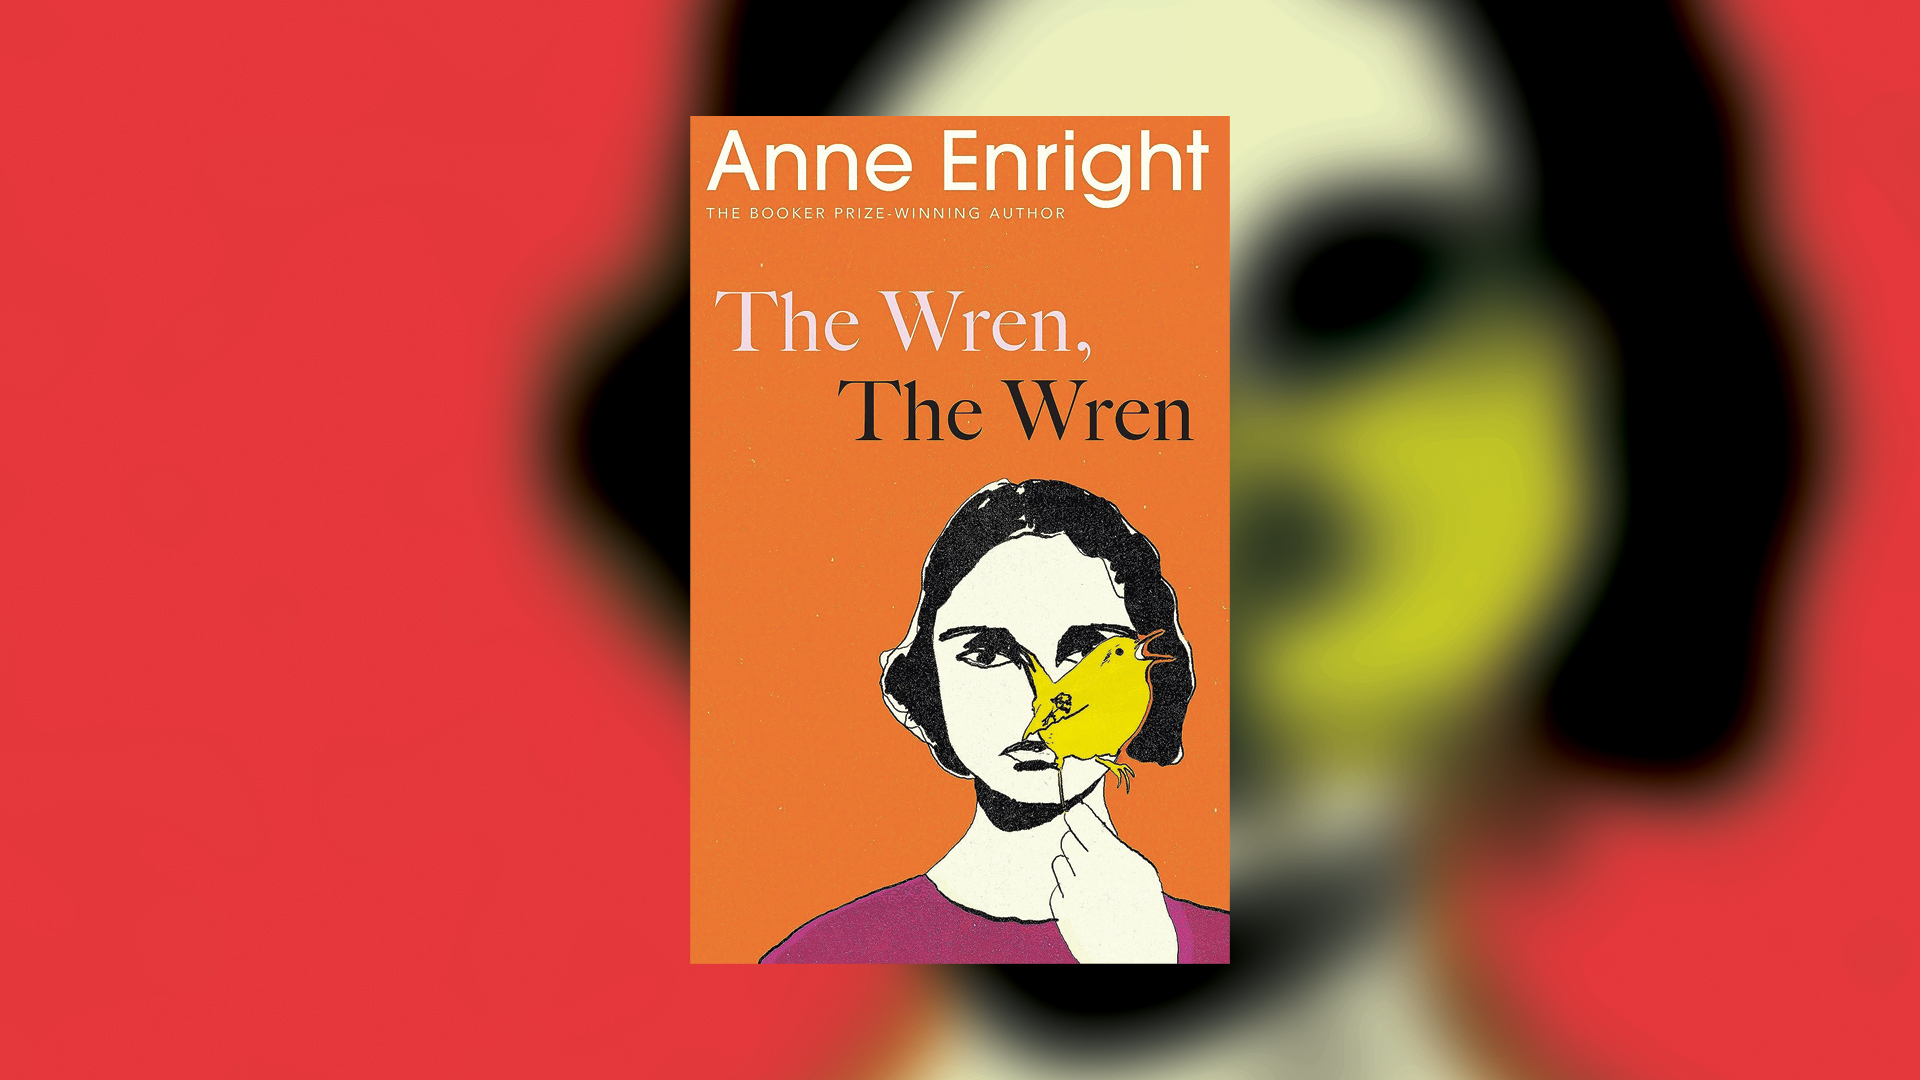 The Wren, The Wren by Anne Enright book cover